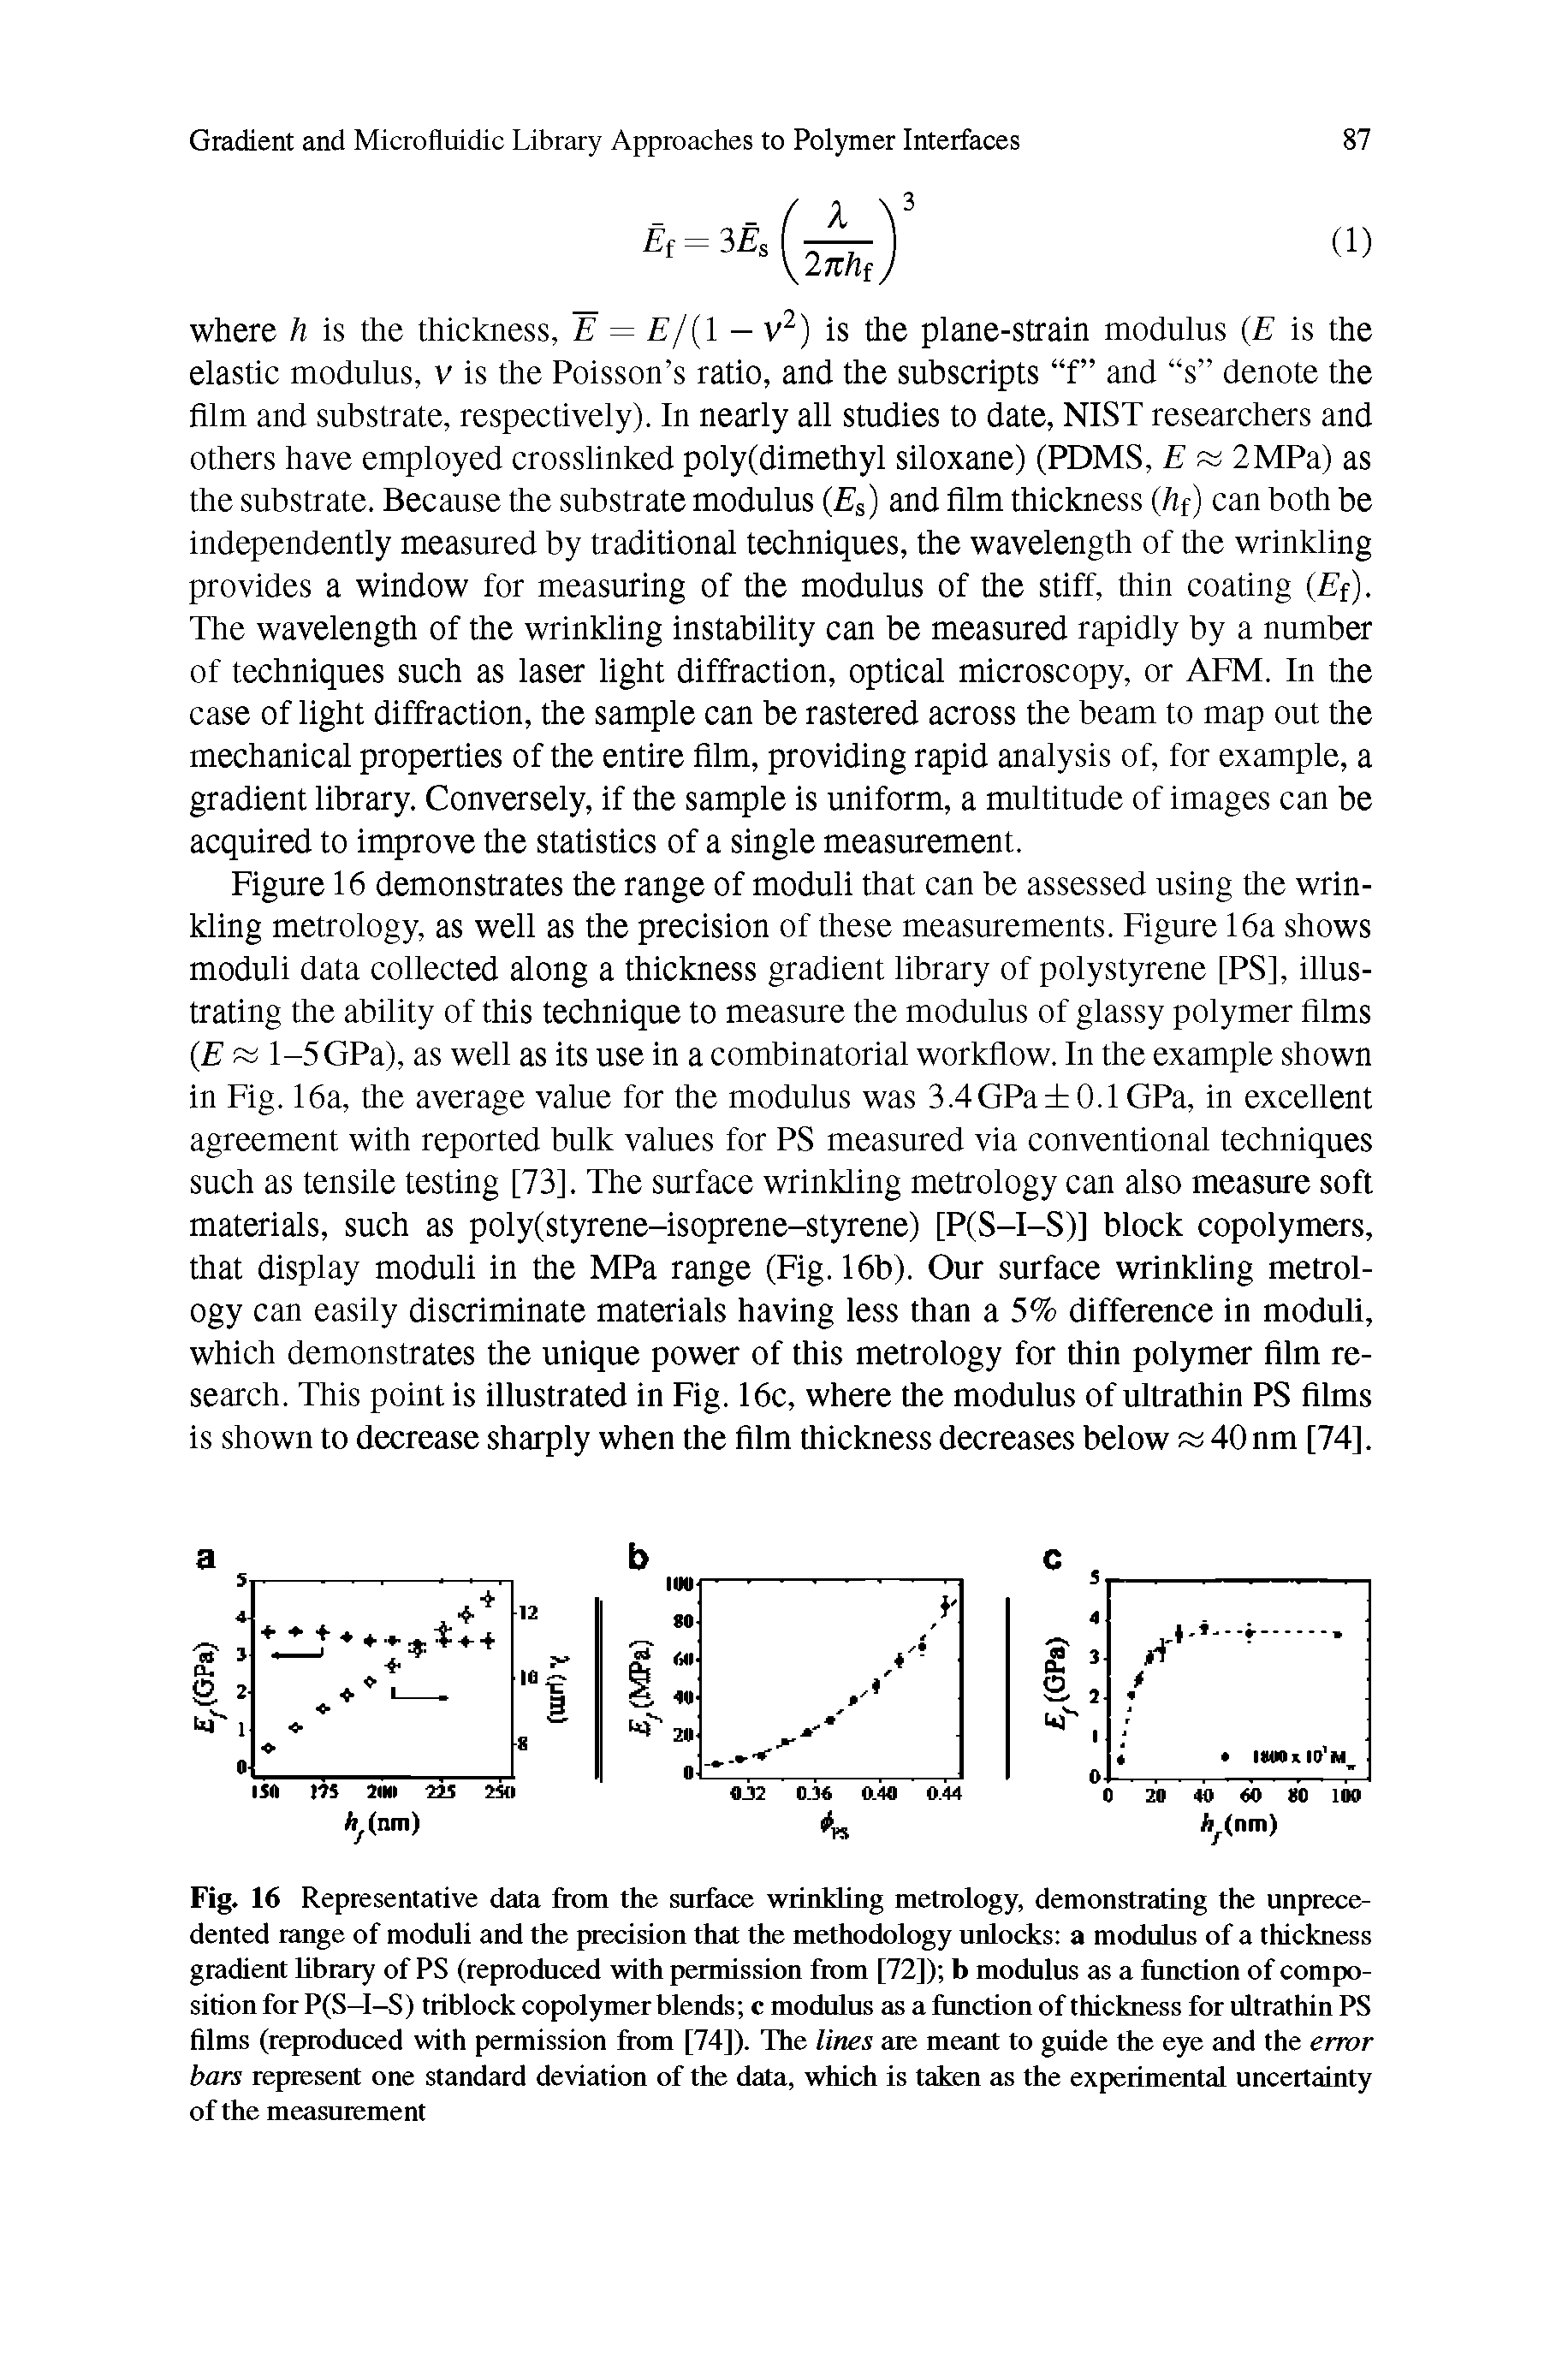 Fig. 16 Representative data from the surface wrinkling metrology, demonstrating the unprecedented range of moduli and the precision that the methodology unlocks a modulus of a thickness gradient library of PS (reproduced with permission from [72]) b modulus as a function of composition for P(S-I-S) triblock copolymer blends c modulus as a function of thickness for ultrathin PS films (reproduced with permission from [74]). The lines are meant to guide the eye and the error bars represent one standard deviation of the data, which is taken as the experimental uncertainty of the measurement...